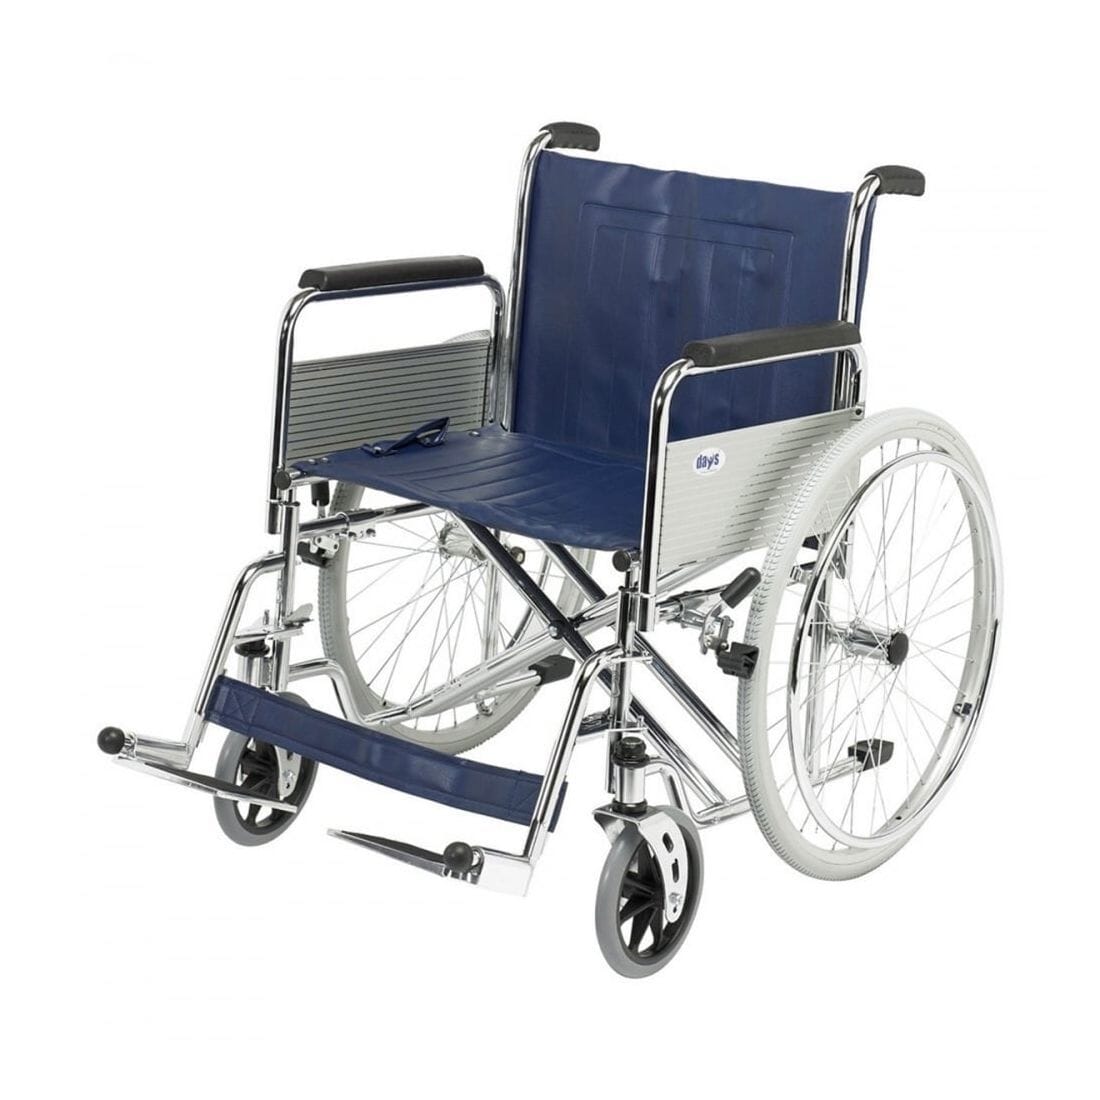 View Days Heavy Duty SelfPropelled Wheelchair With Detachable Armrests and Footrests and Folding Back information